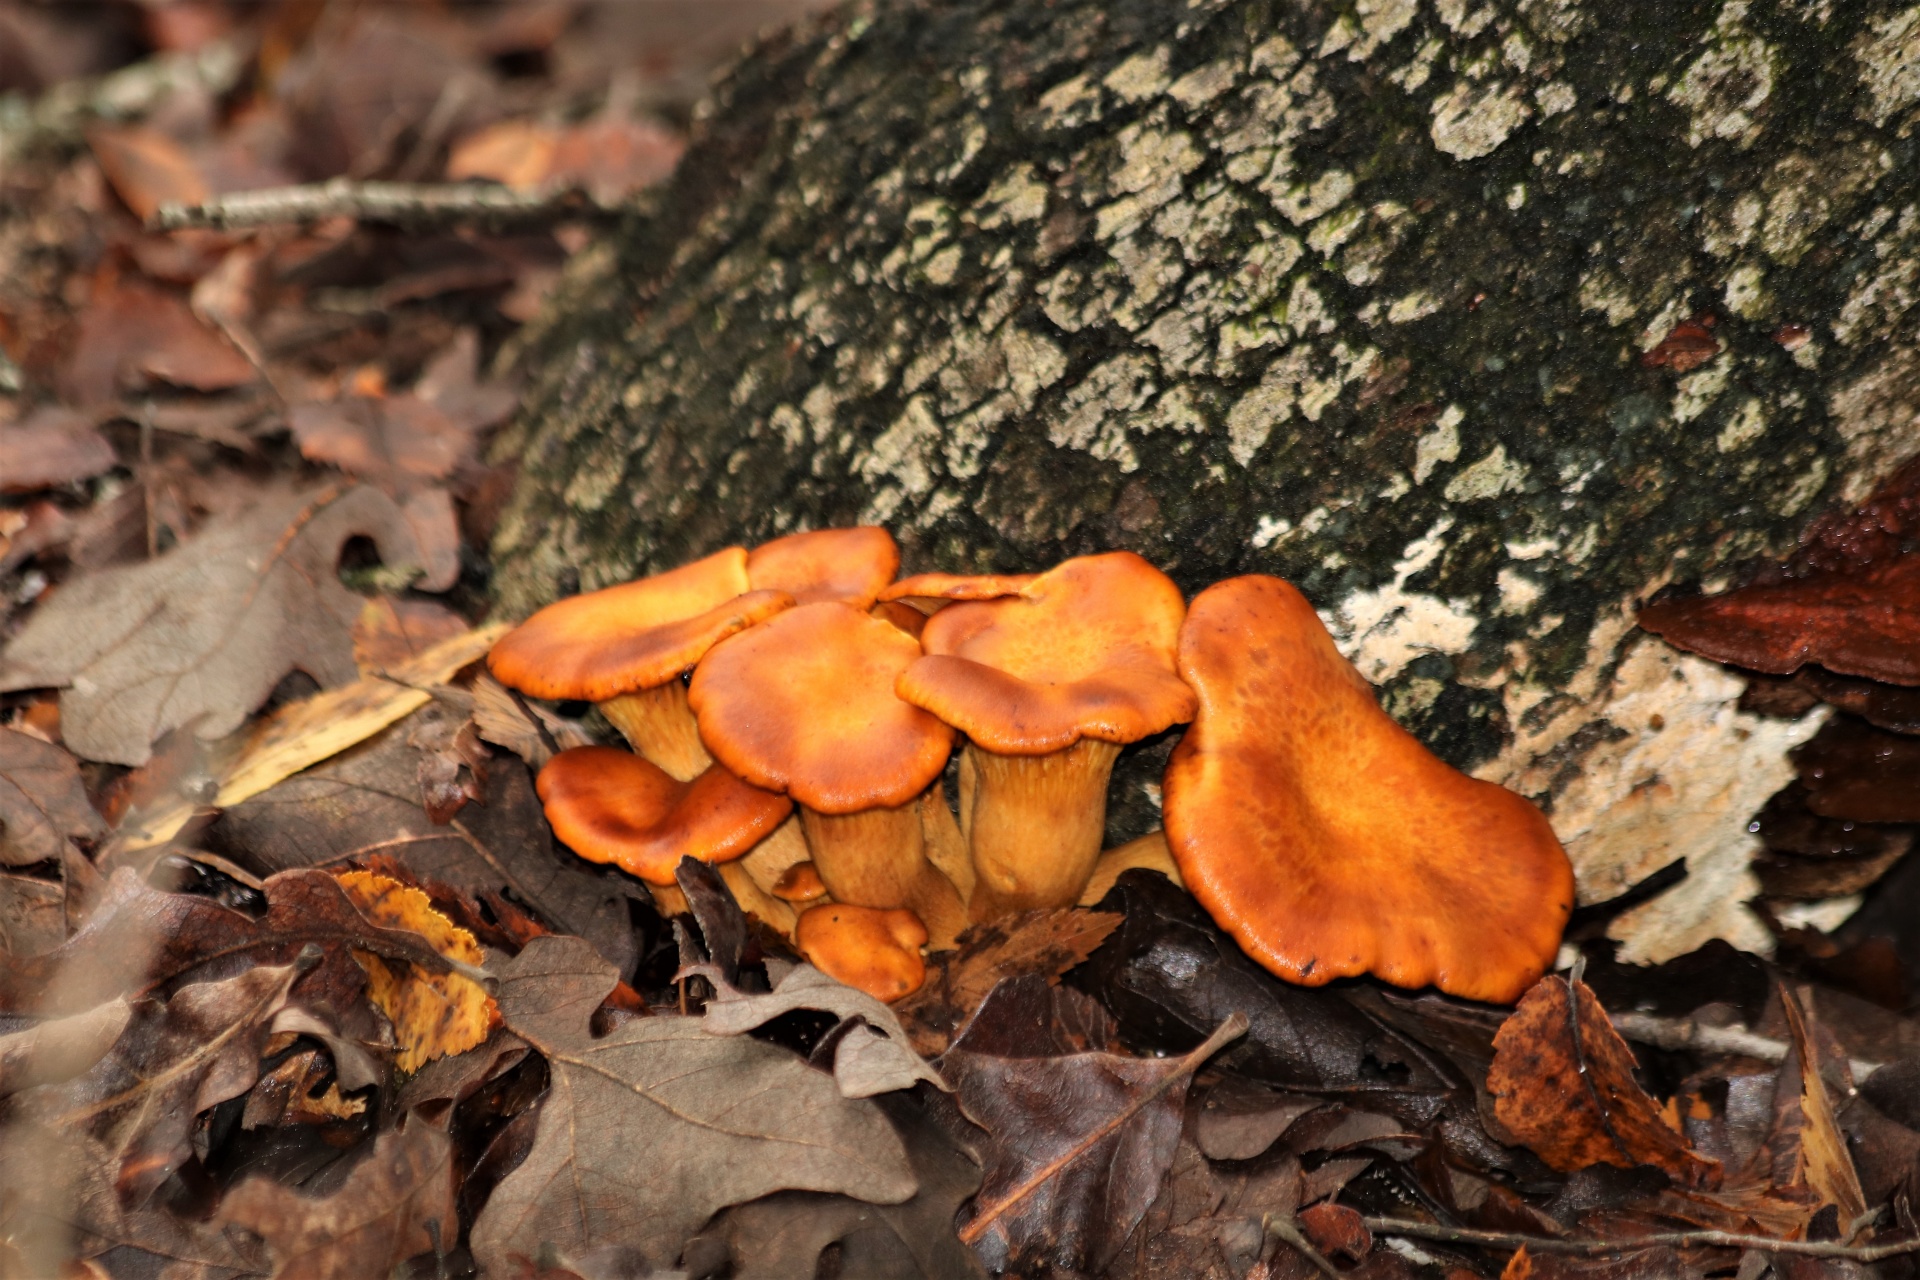 A group of dark orange jack-o-lantern mushrooms growing out of autumn leaves at the base of a tree in fall.